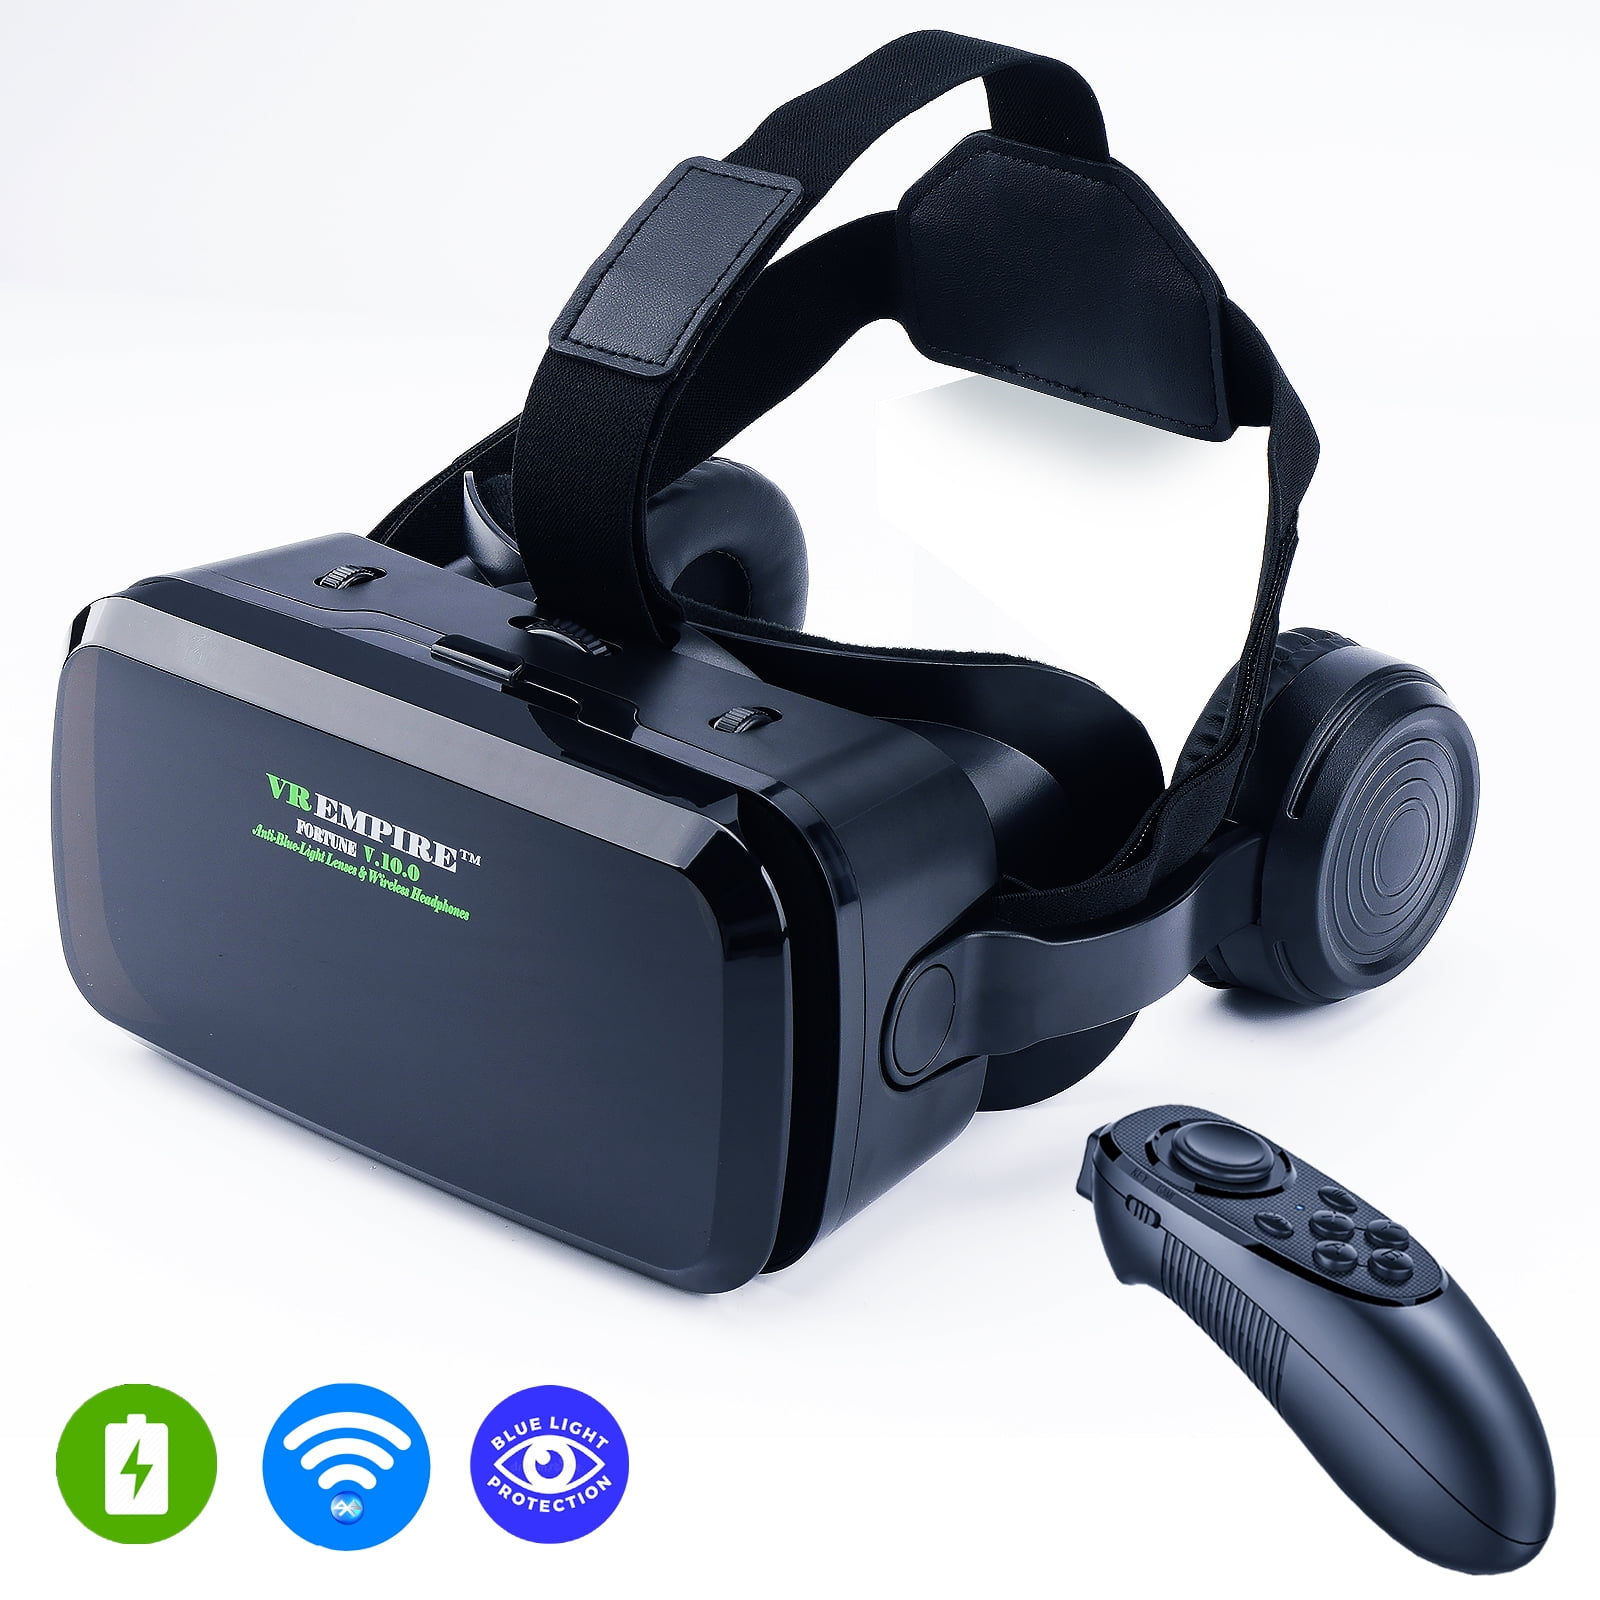 VR Headset for Android Phone/iPhone with Controller, 120° FOV, 3.5mm Audio Wireless Adaptor, Anti-Blue-Light Lenses, Fits for All Mobile's Length/Display Size Up to 6.7/7.2 (V9WR) - Walmart.com